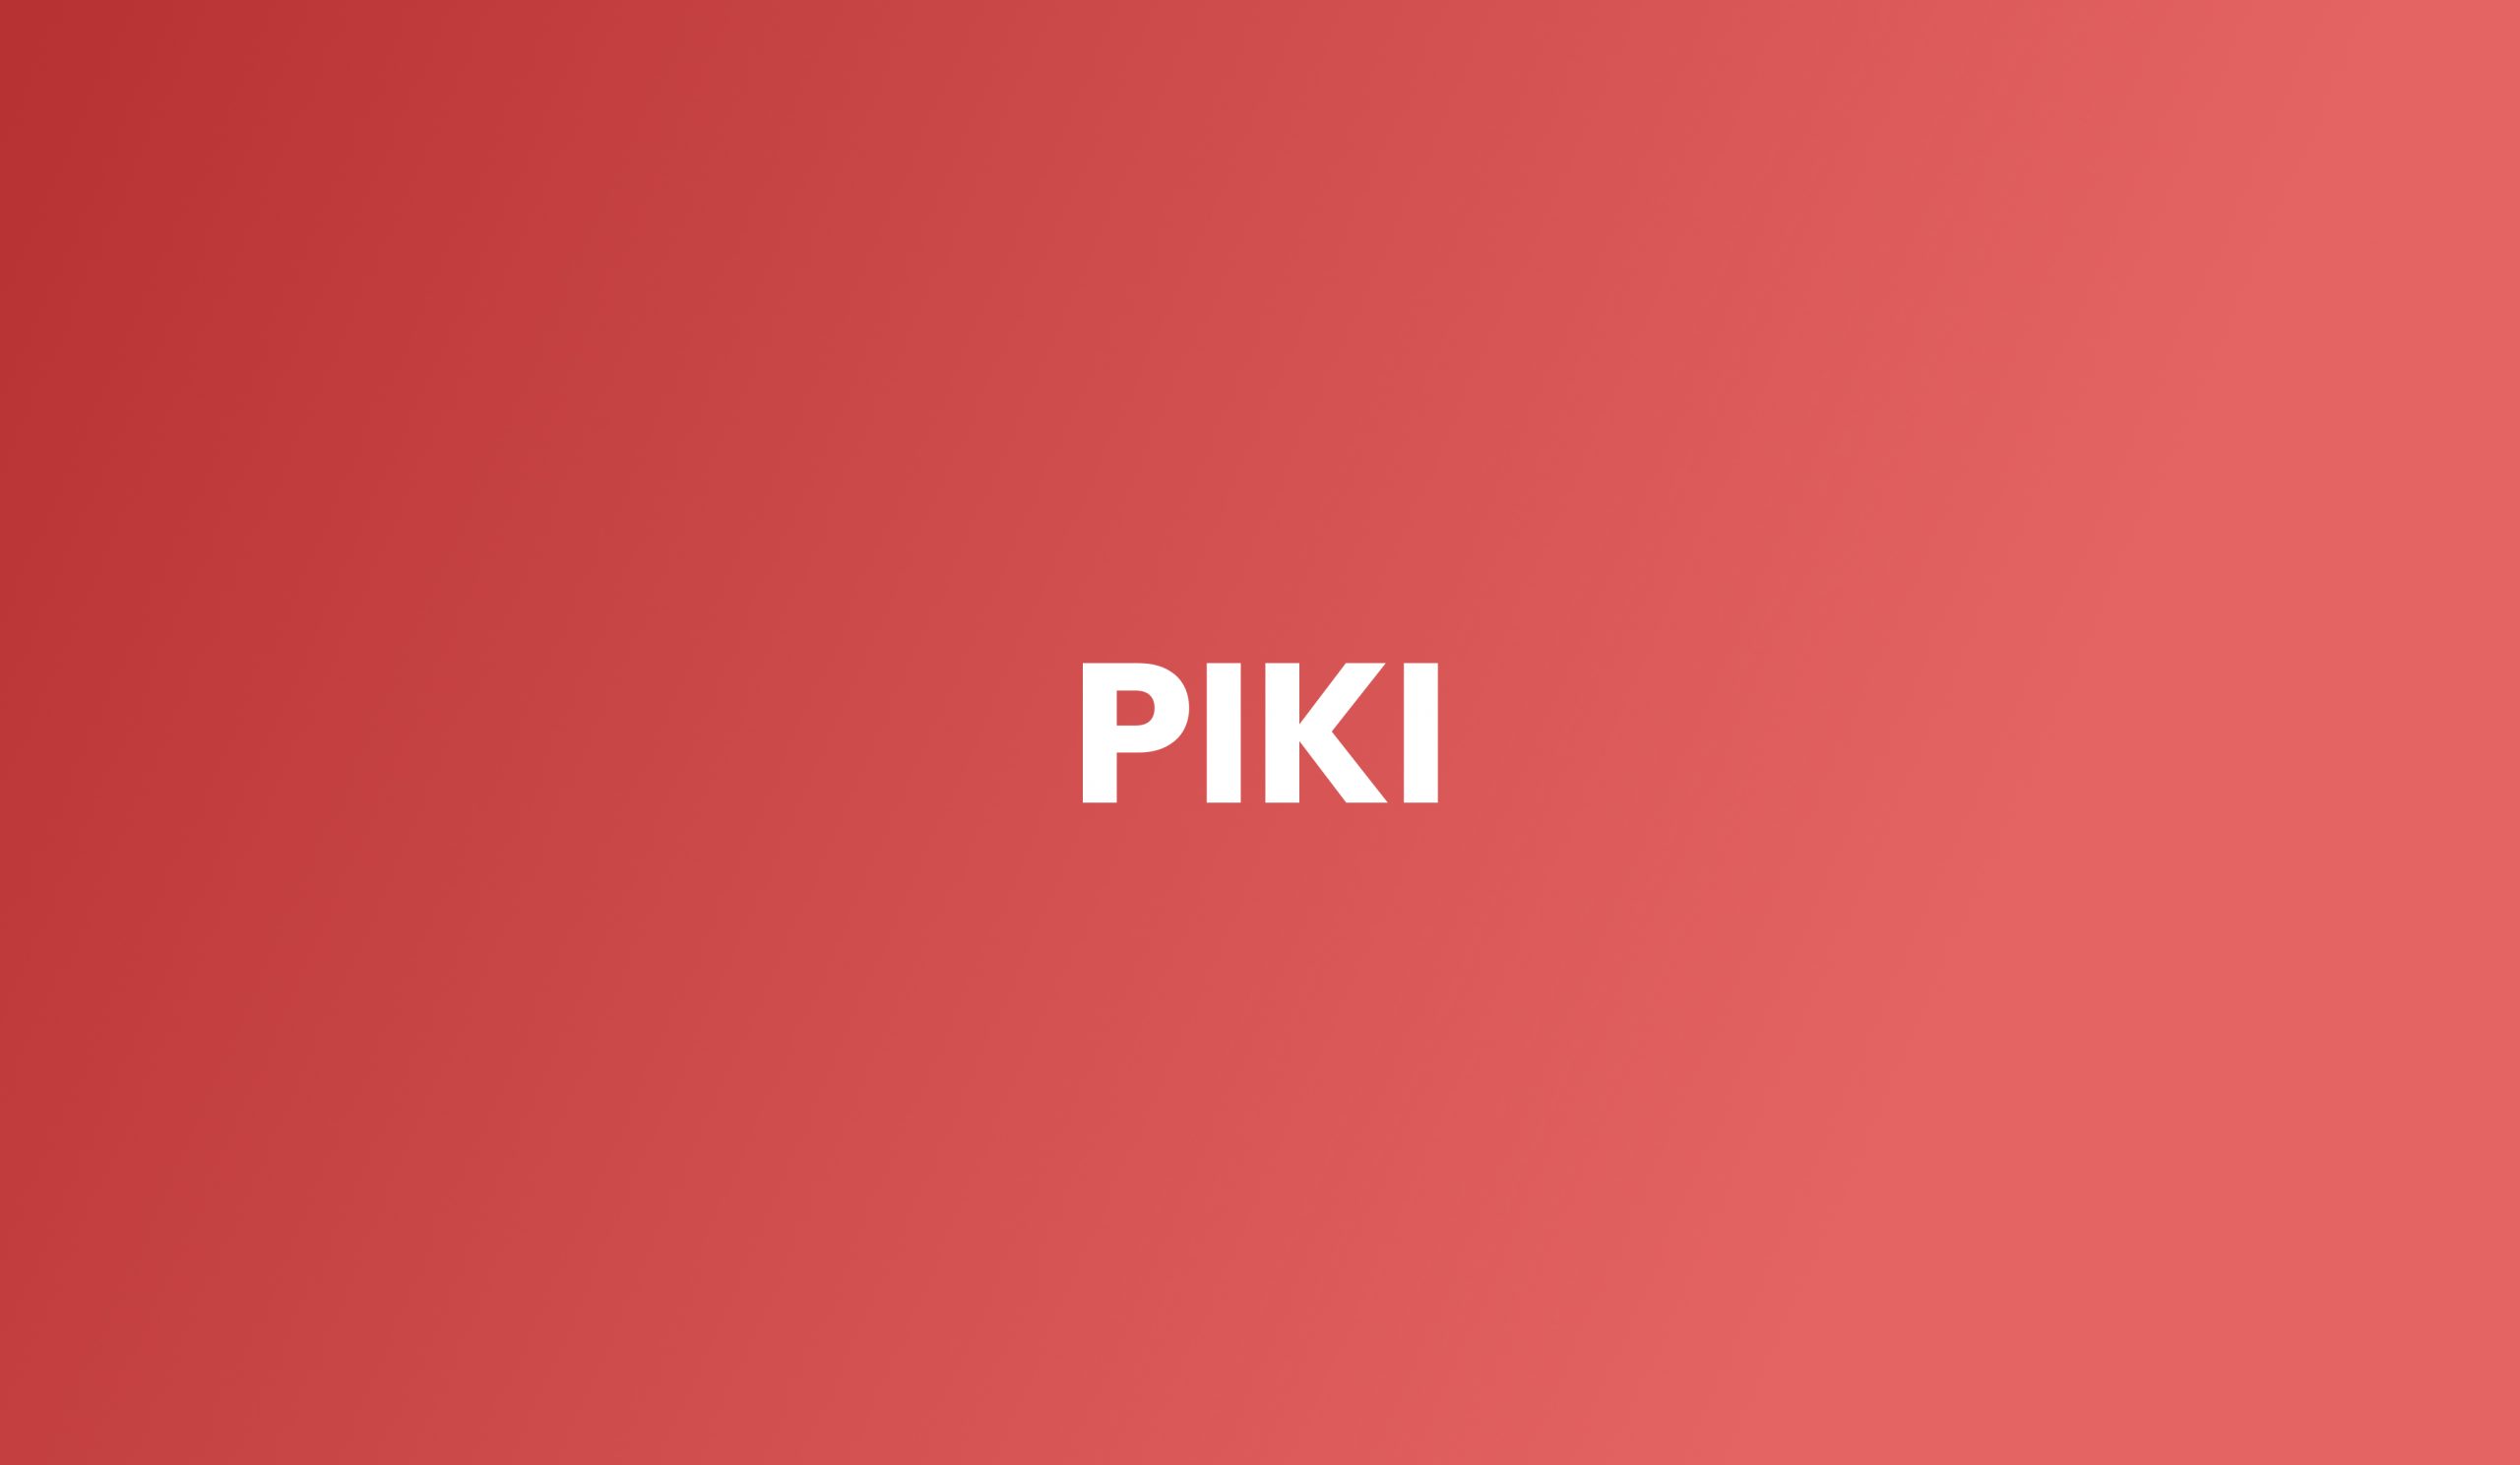 Pikii – Good Omegle Alternative To Connect With Famous People